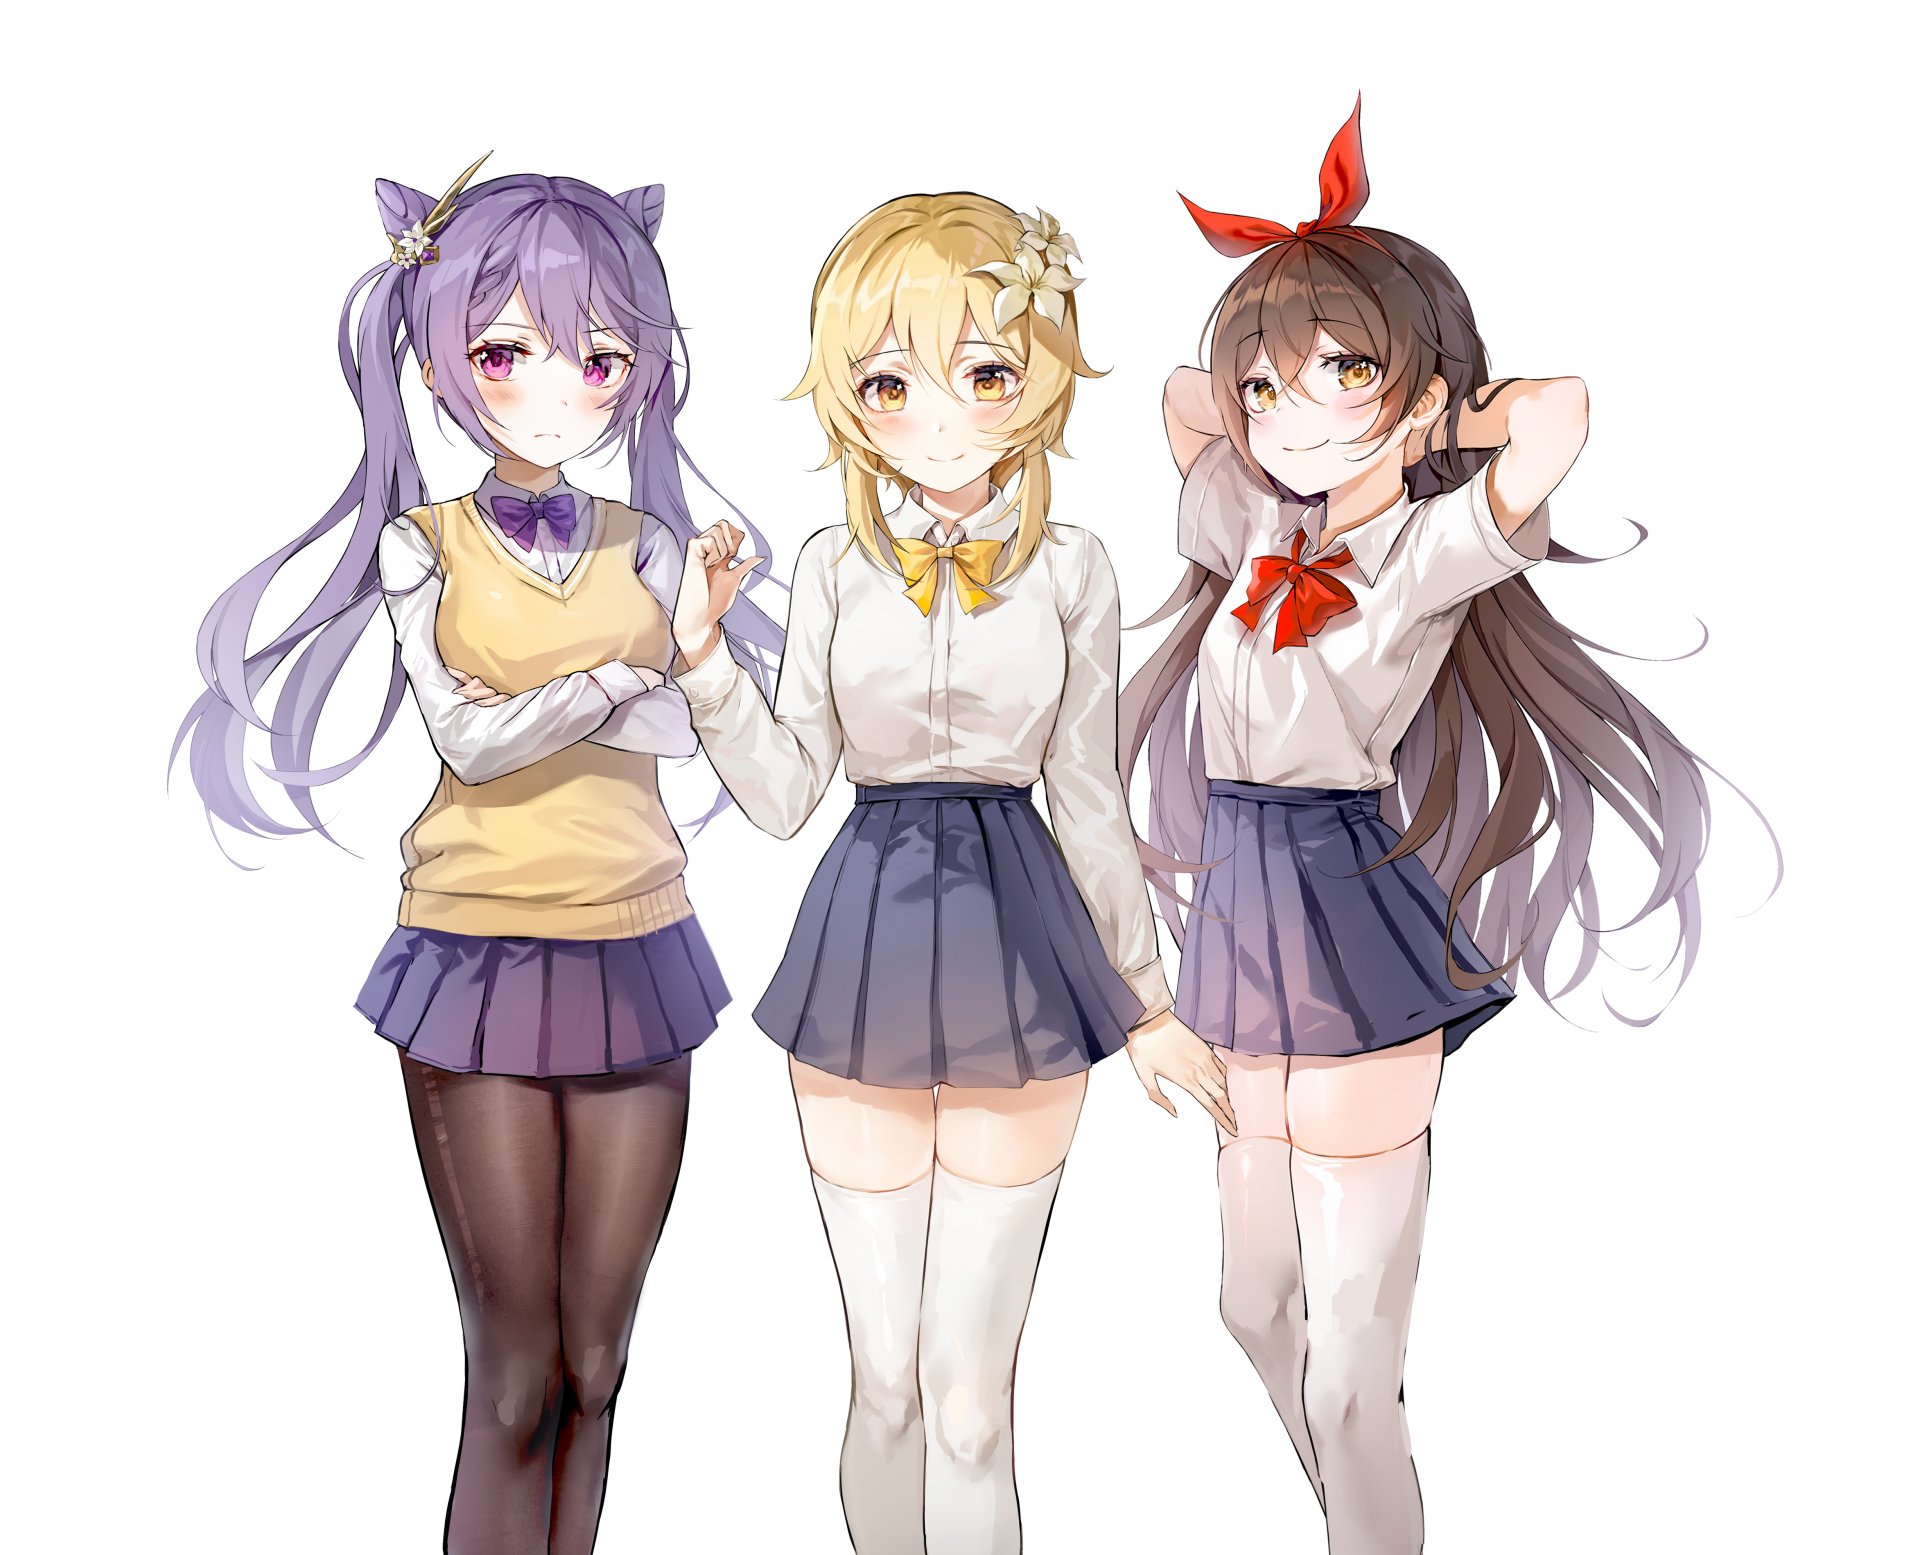 4690x3798 Keqing, Lumine, and Amber in their high school uniform by はるさめ Wa...